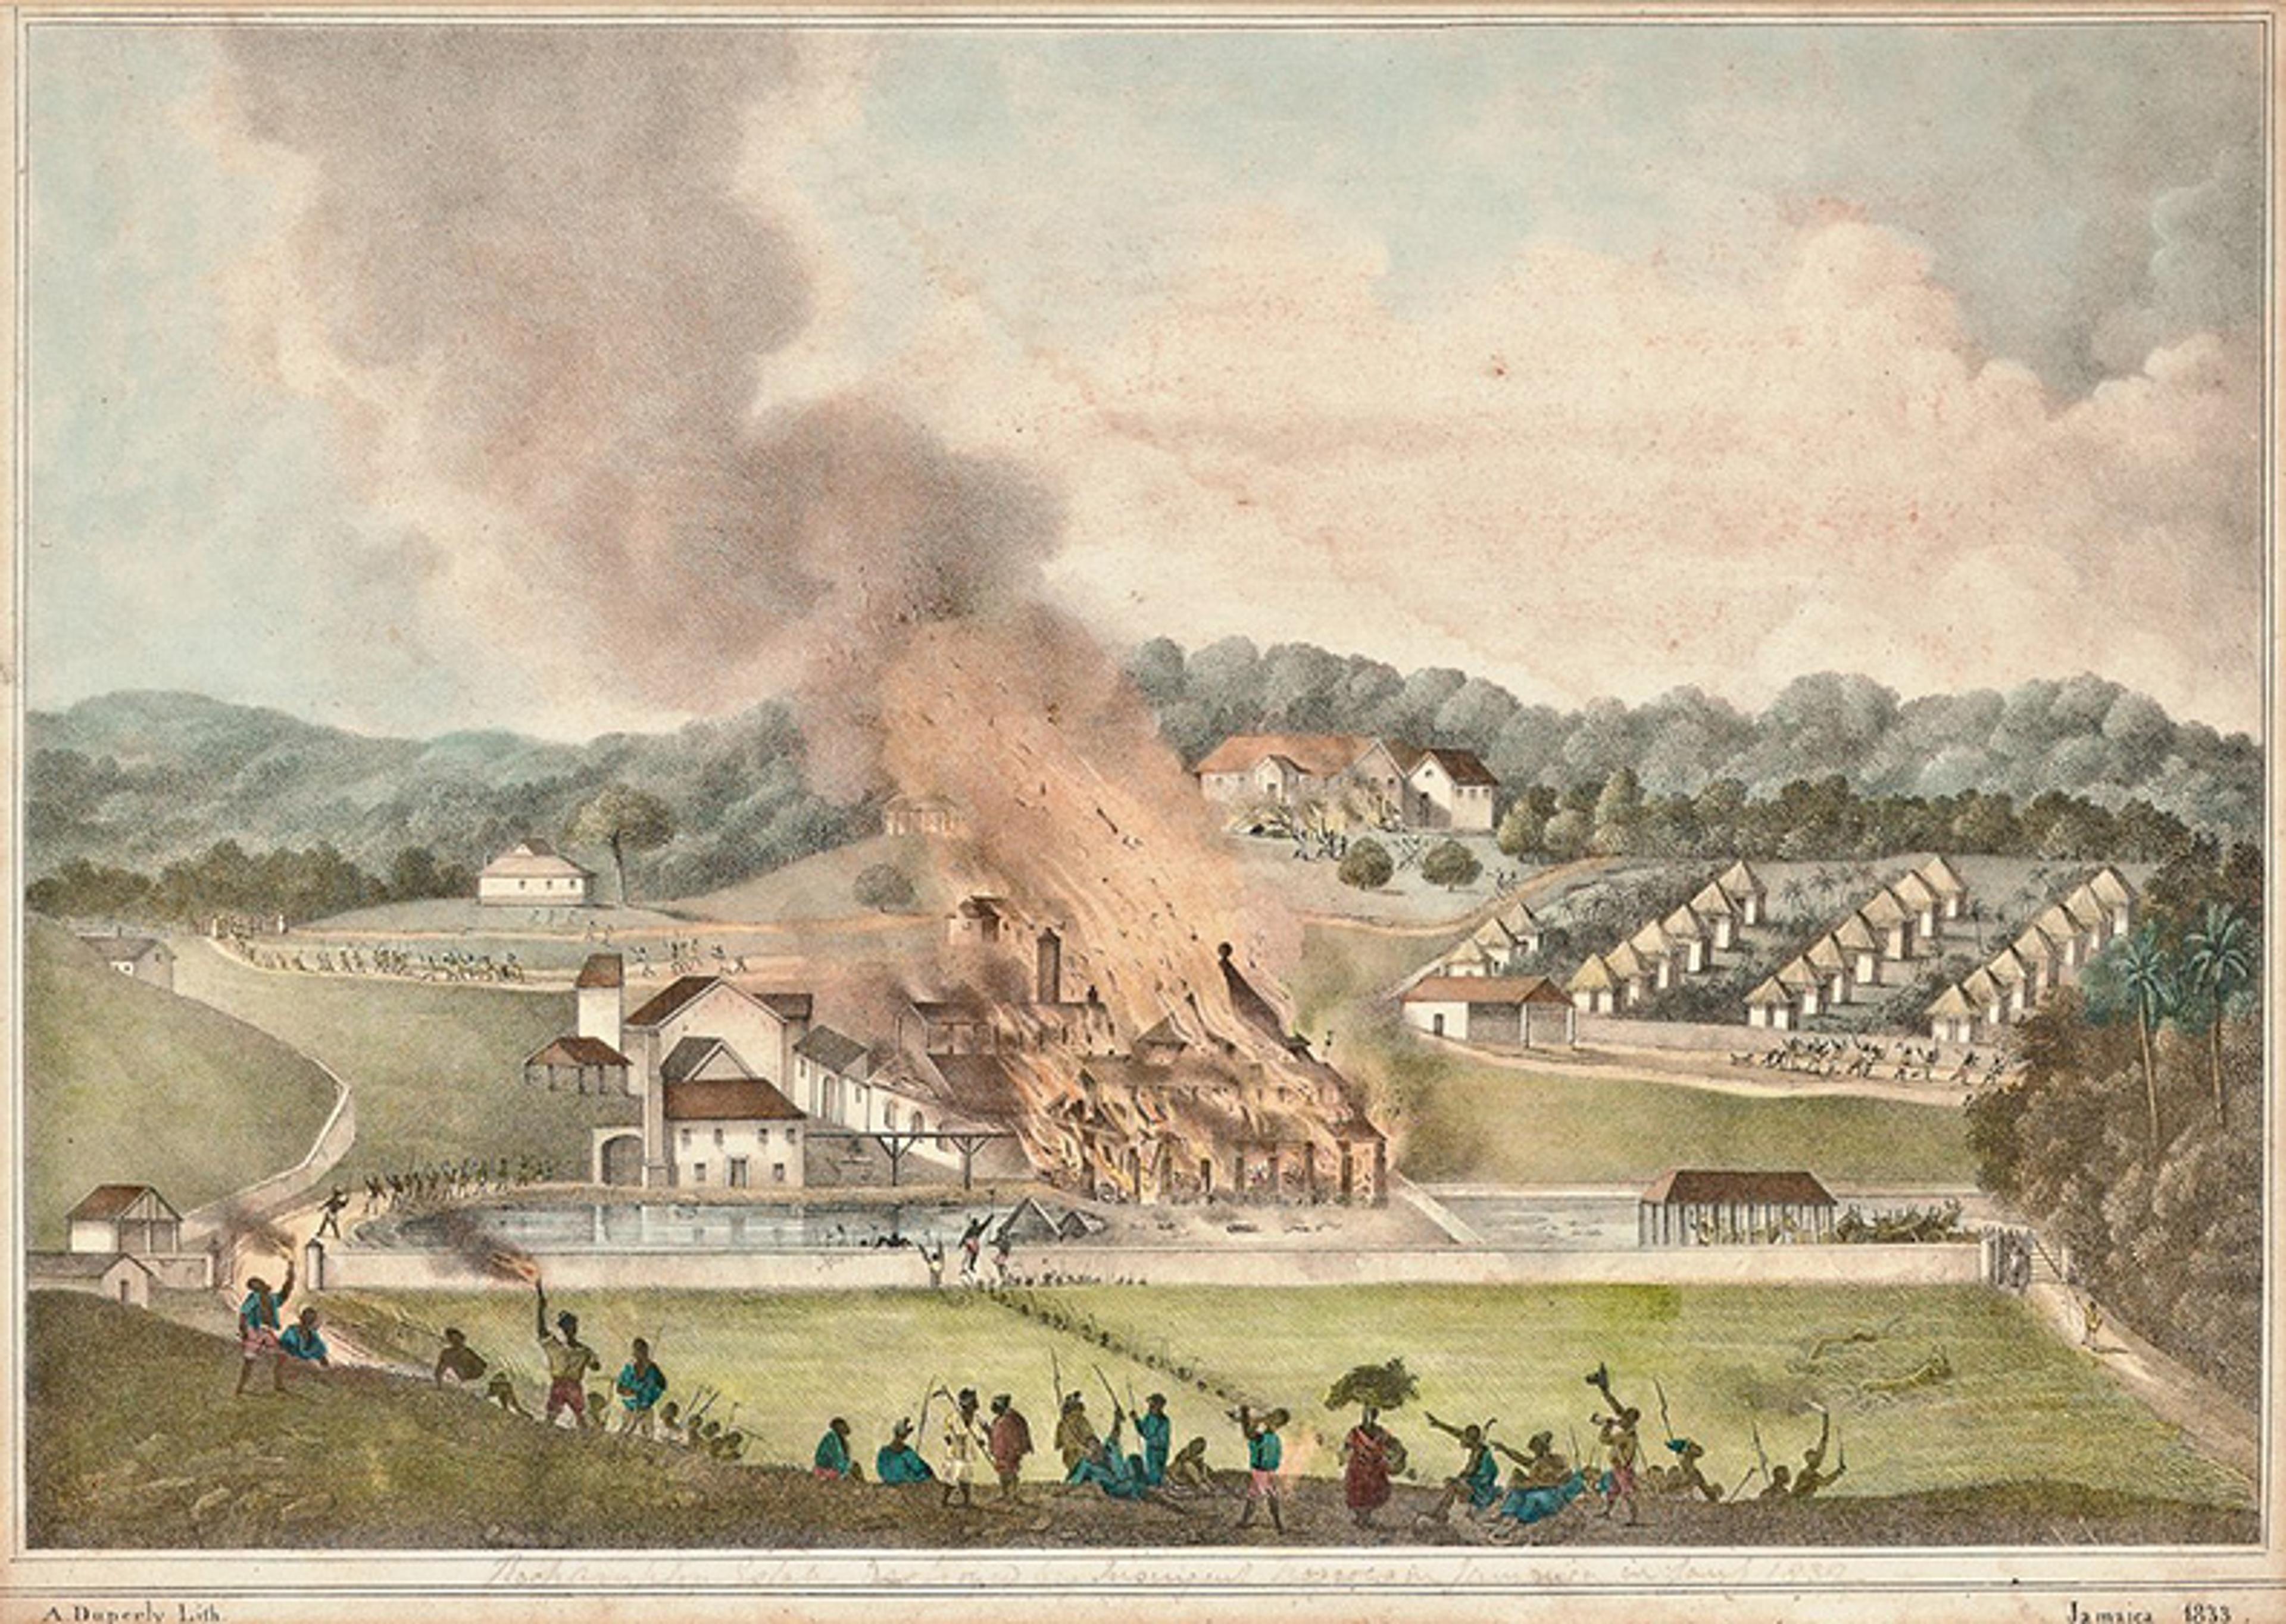 A historical illustration depicting a plantation building engulfed in flames with thick smoke rising. In the foreground, people are seen gathering and reacting. Surrounding the burning structure are fields, trees, houses, and other buildings. The image is labelled “Jamaica 1833.”